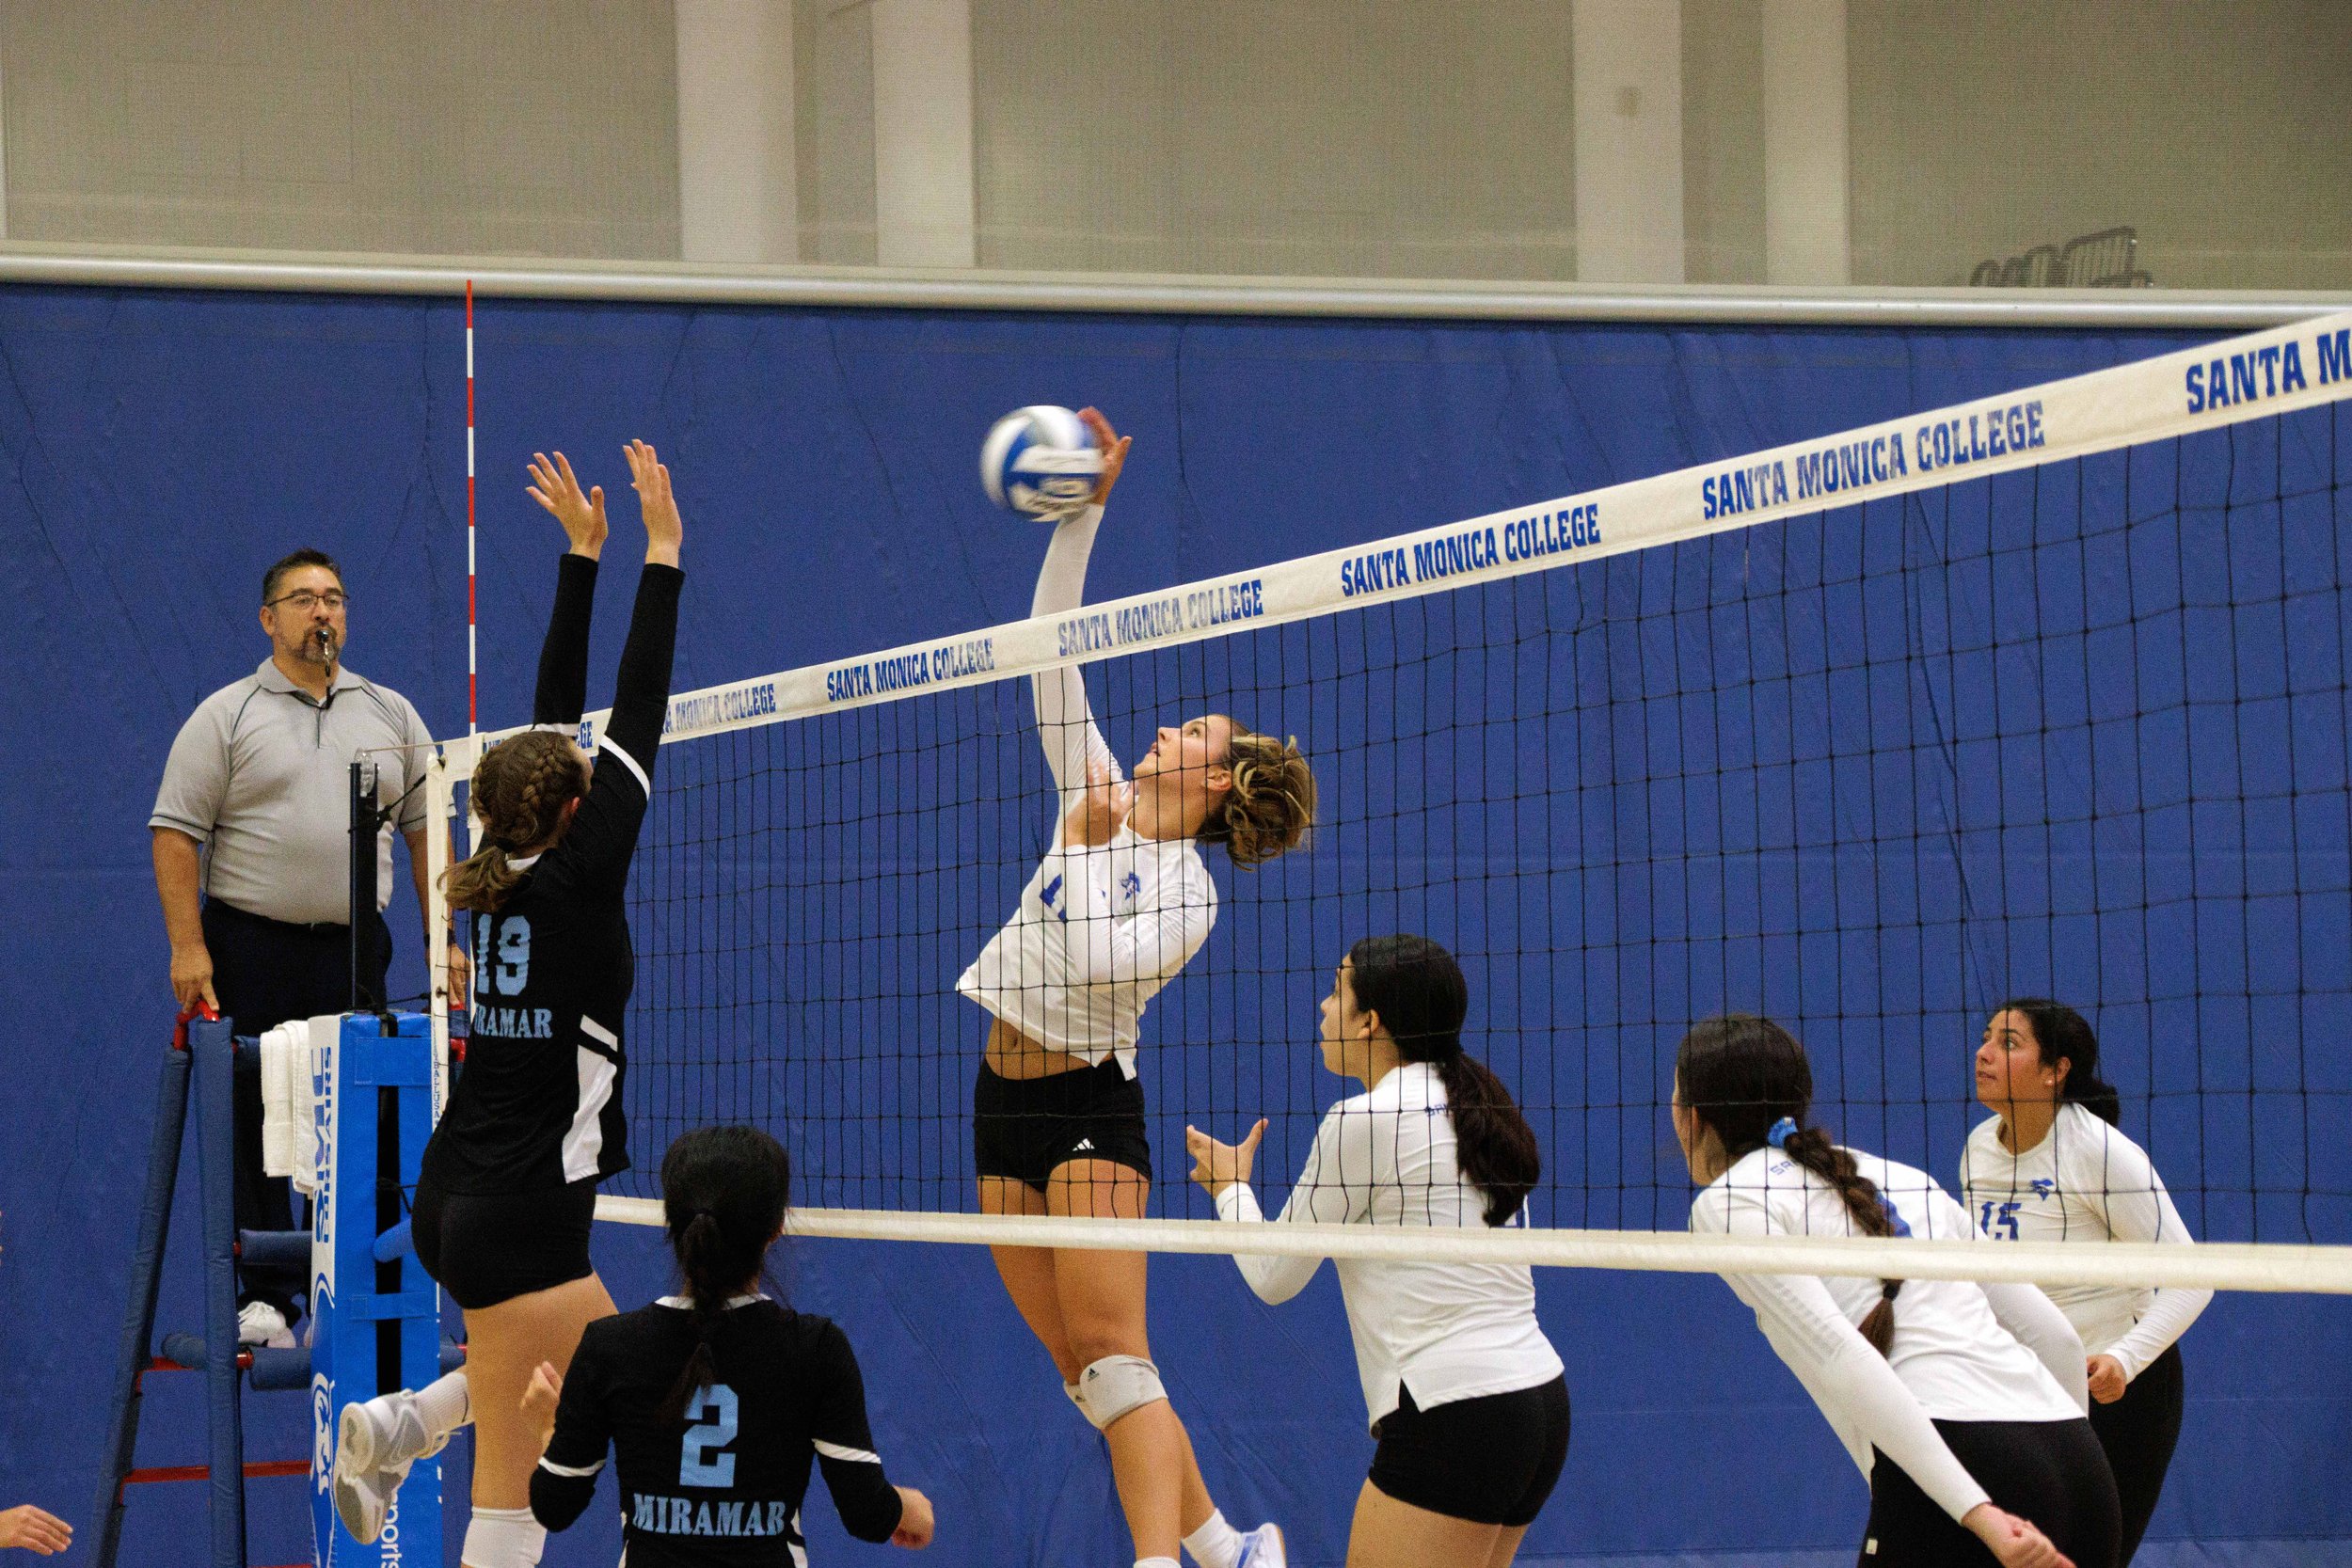  Setter Mia Paulson, number 12, center, of Santa Monica College (SMC) Women's Volleyball, hits the ball, performing an attack while number 19 of San Diego Miramar tries to block it at the SMC gymnasium, Santa Monica, Calif. on Sept. 08, 2023. (Dannie